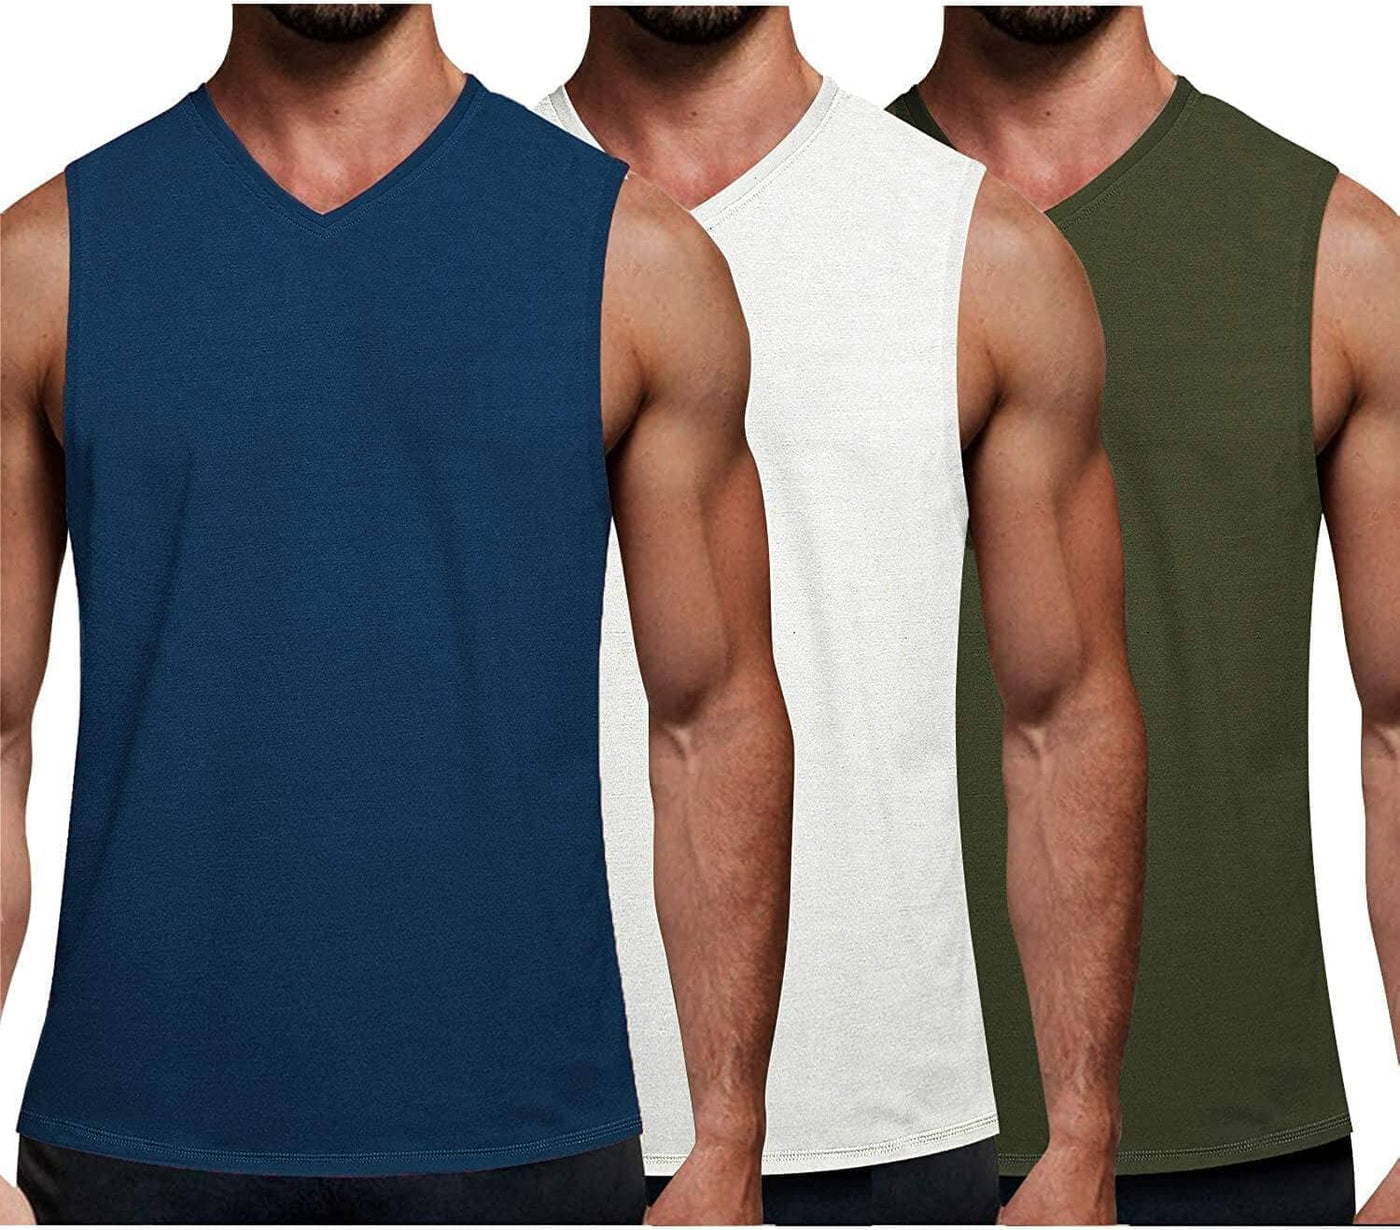 Coofandy 3-Pack Fitness Tank Top (US Only) Tank Tops coofandy Light Navy Blue/White/Army Green S 